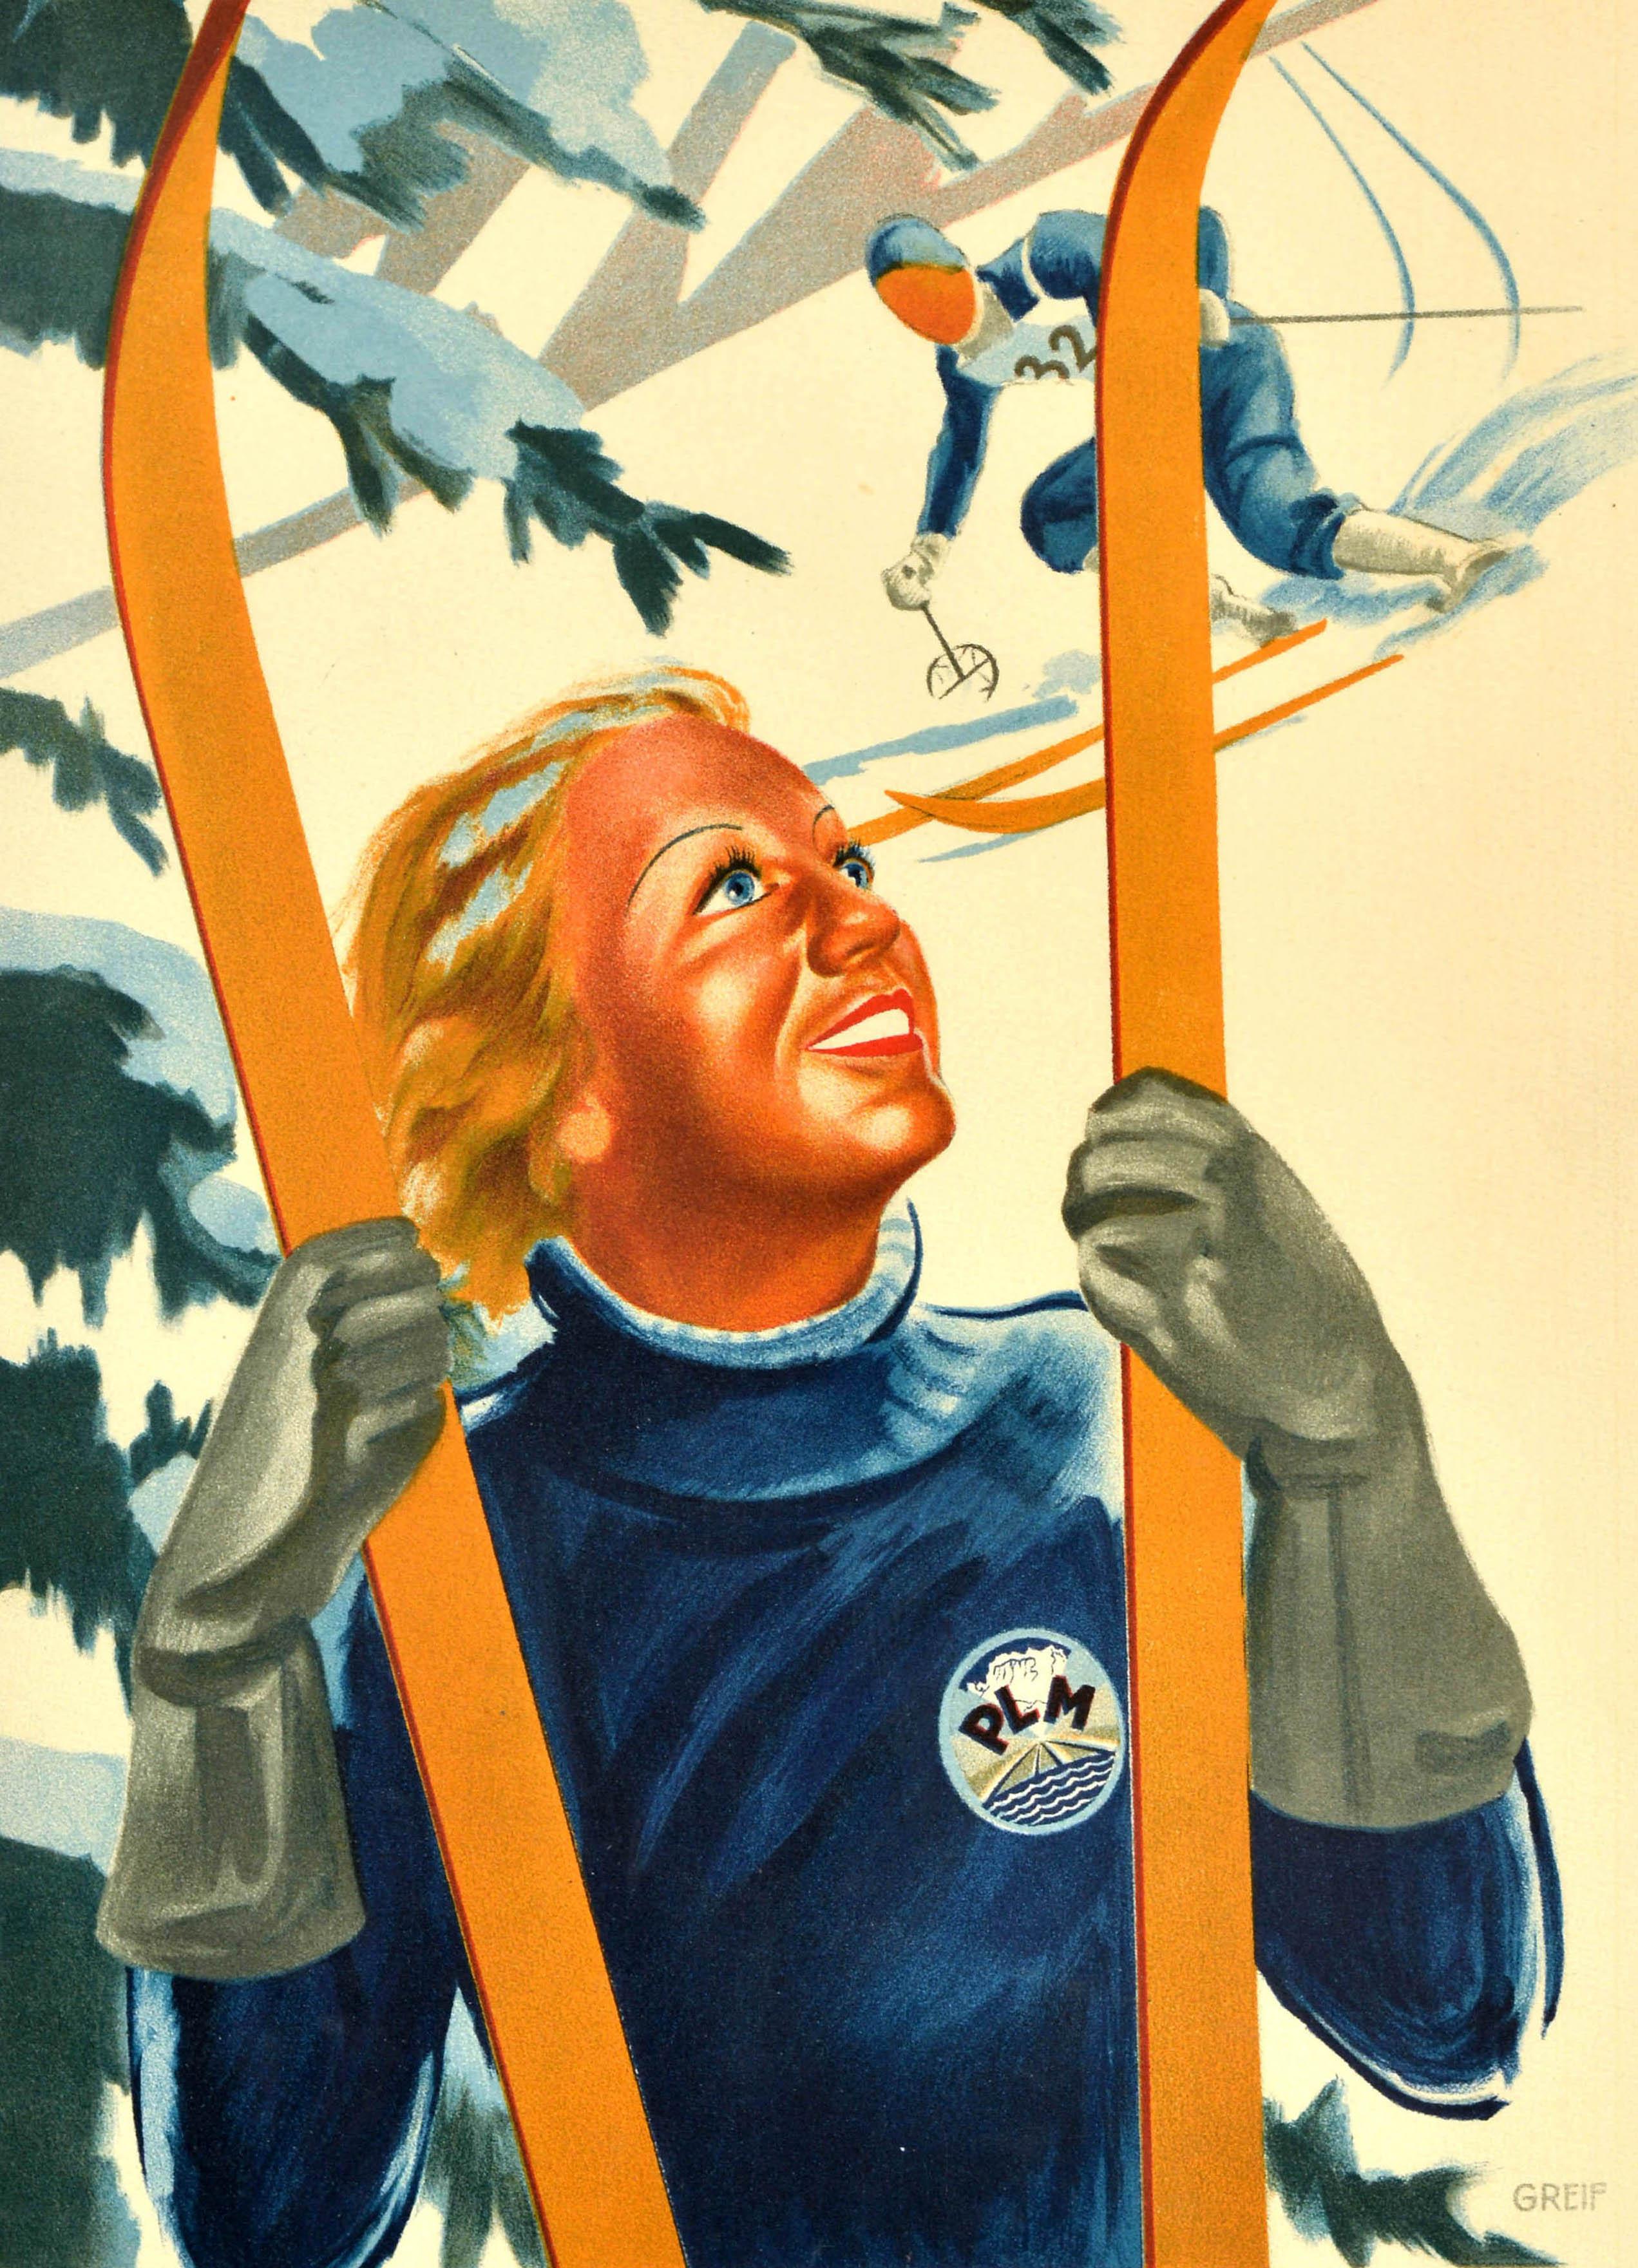 Original Vintage Winter Sport Skiing Travel Poster Alpes And Jura PLM Railway - Print by Unknown